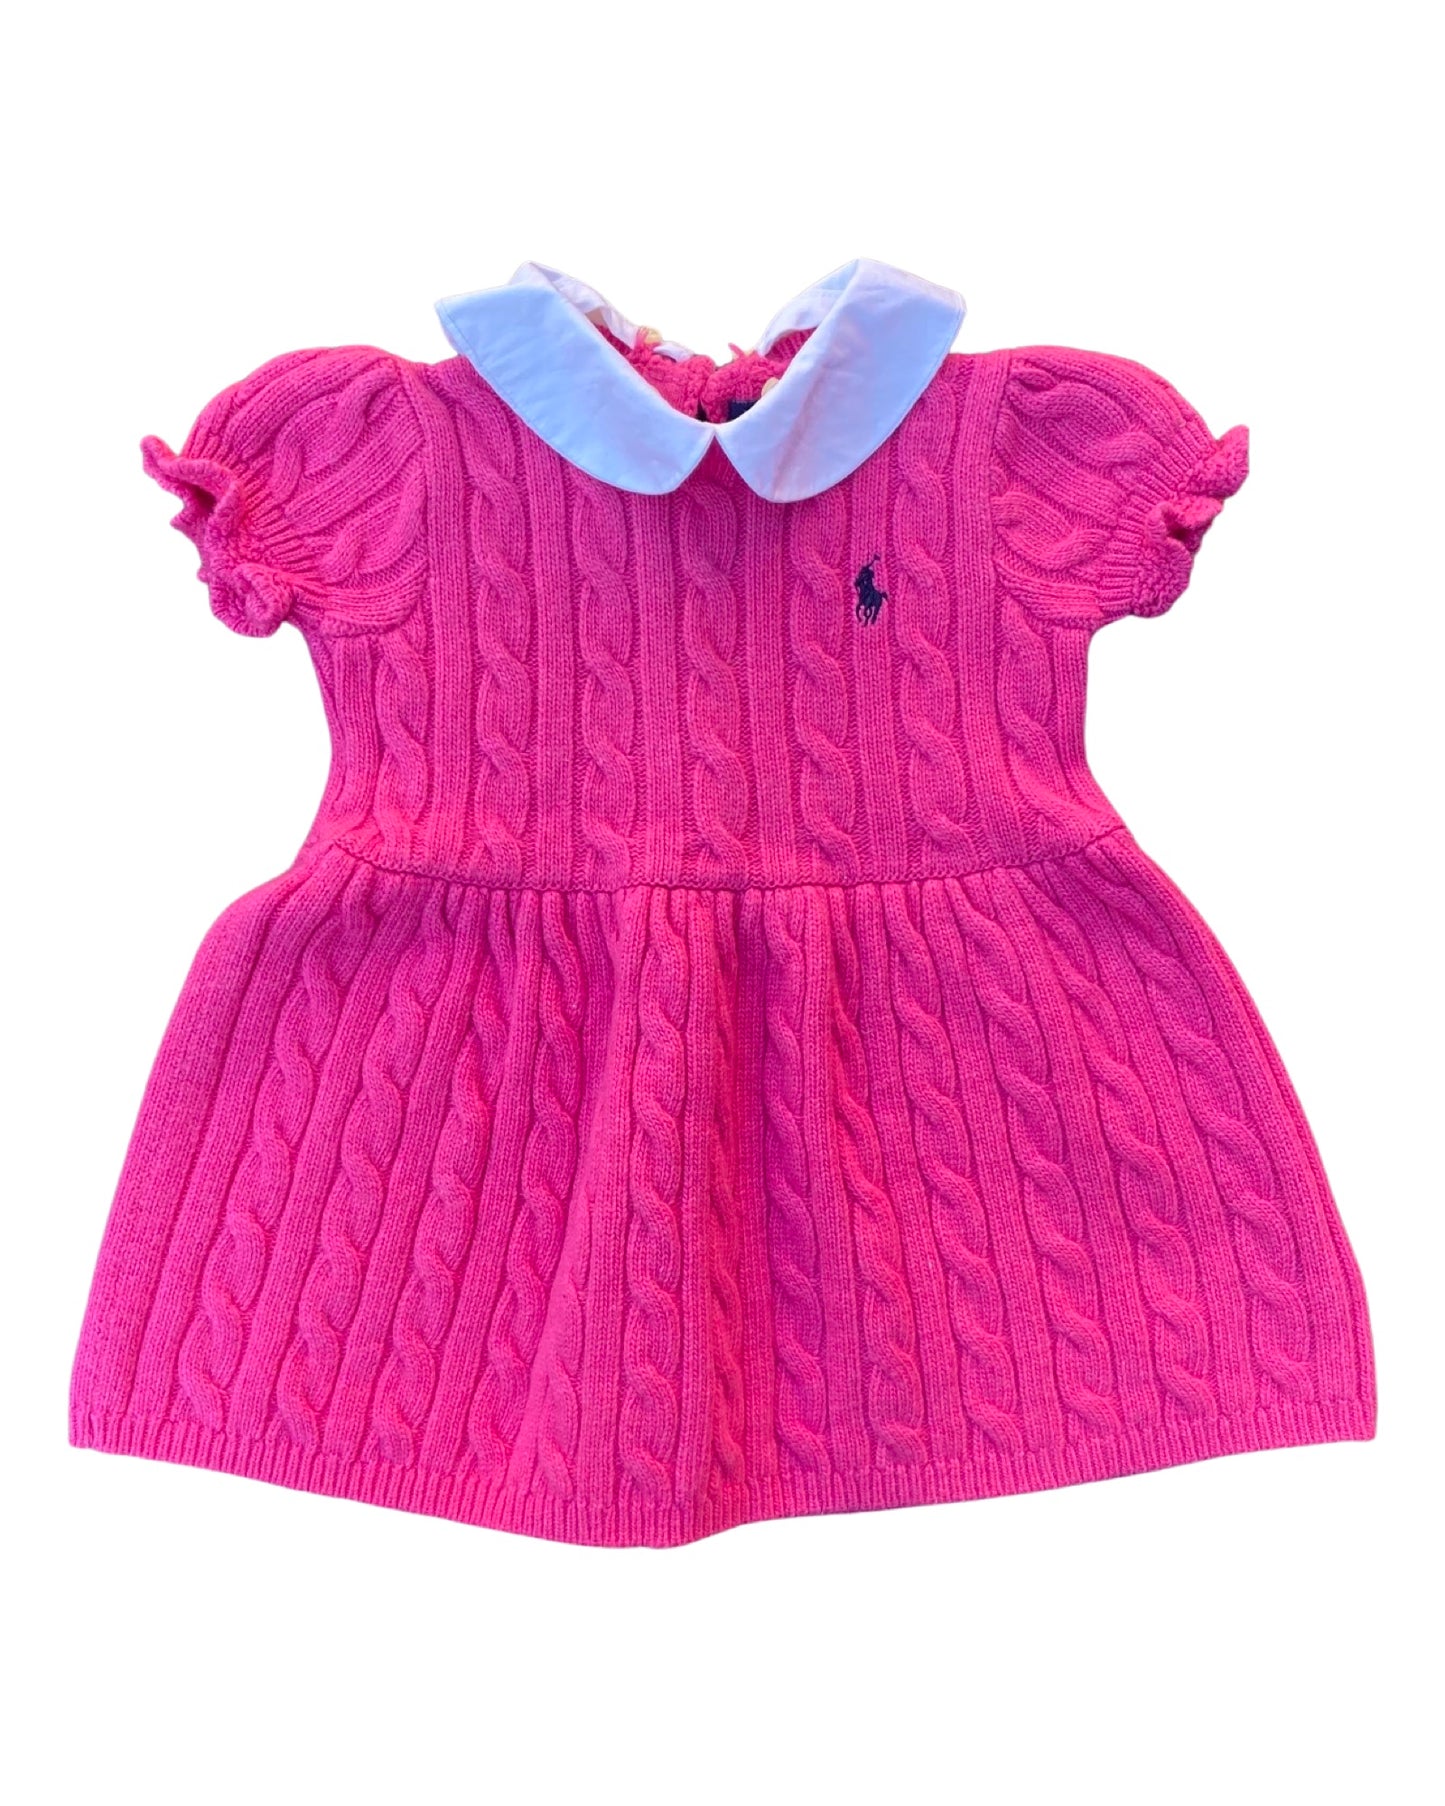 Ralph Lauren knitted hot pink cable knit collared dress (12mths)